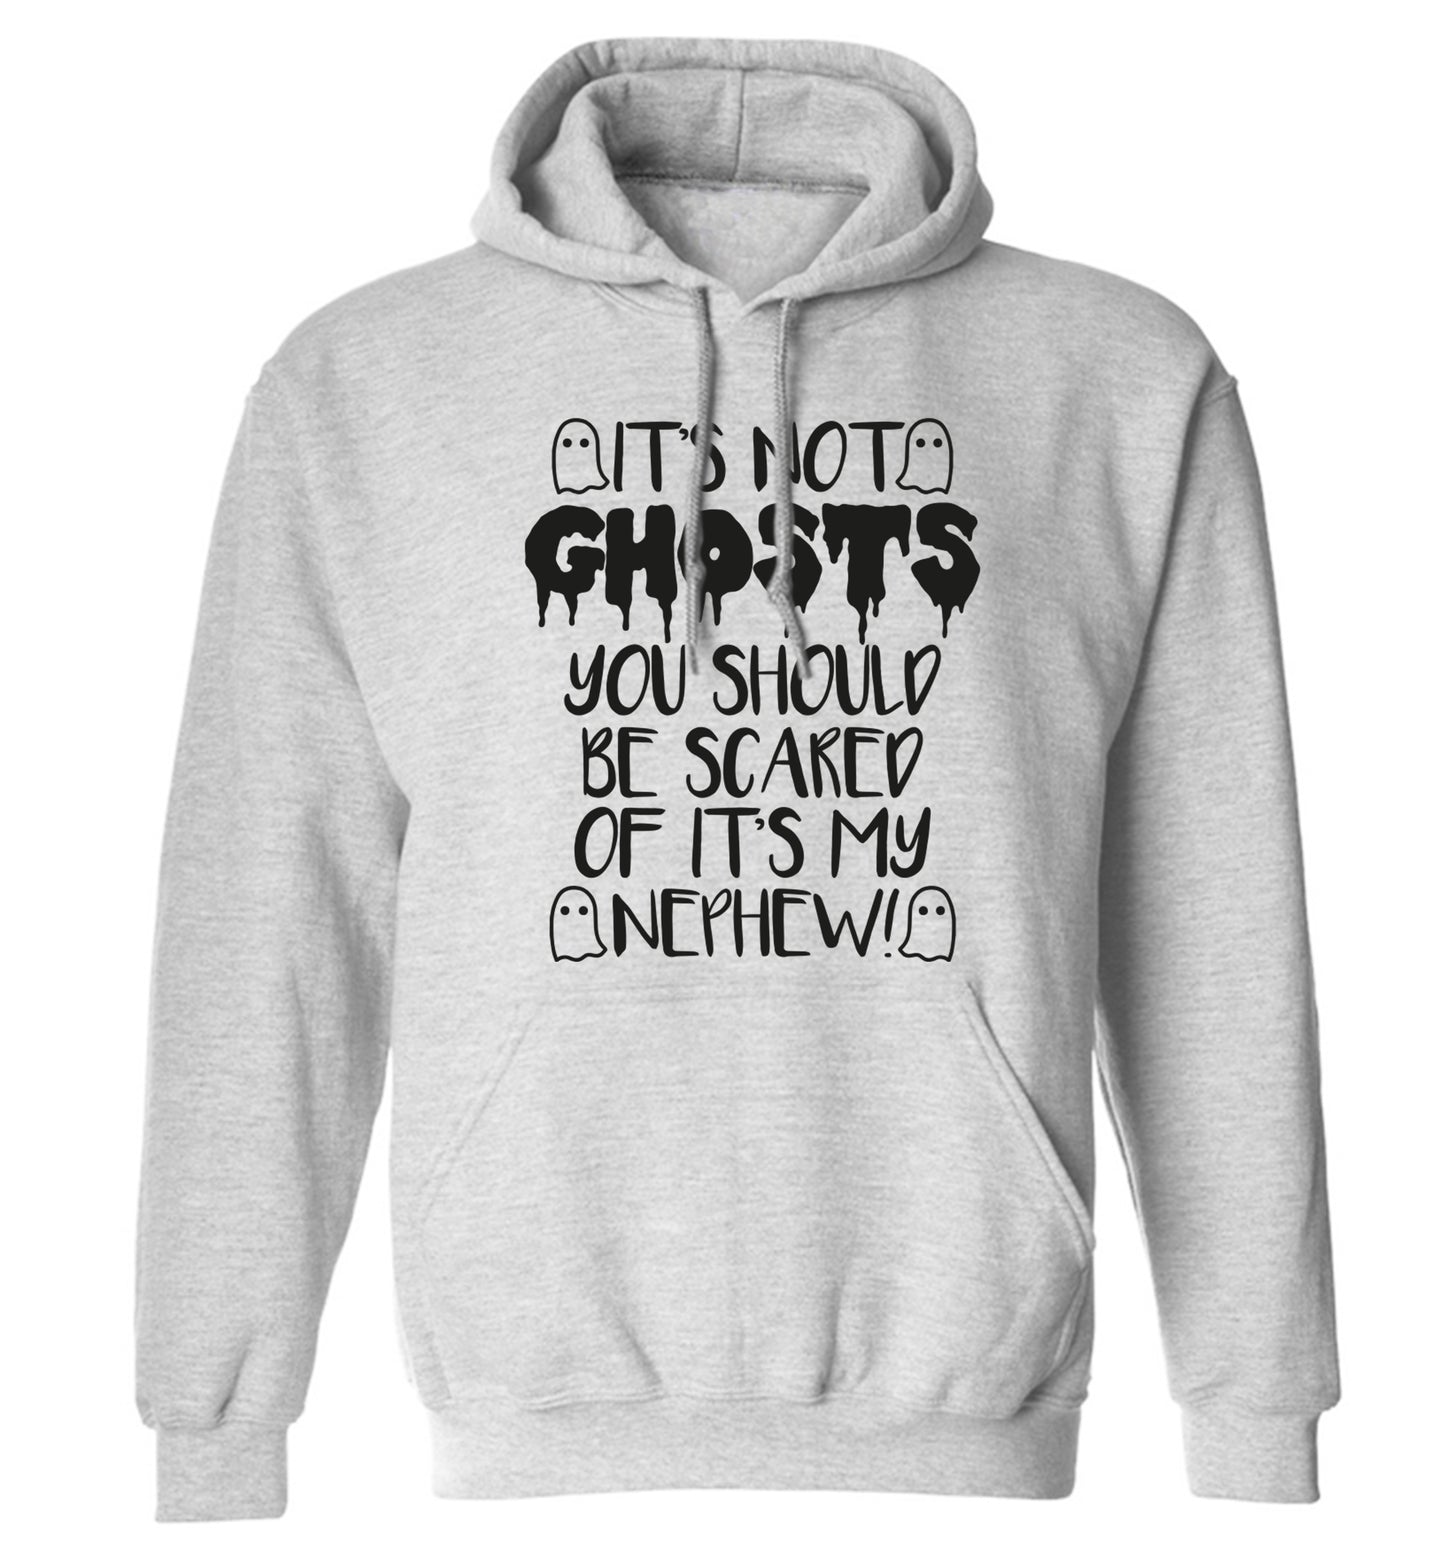 It's not ghosts you should be scared of it's my nephew! adults unisex grey hoodie 2XL